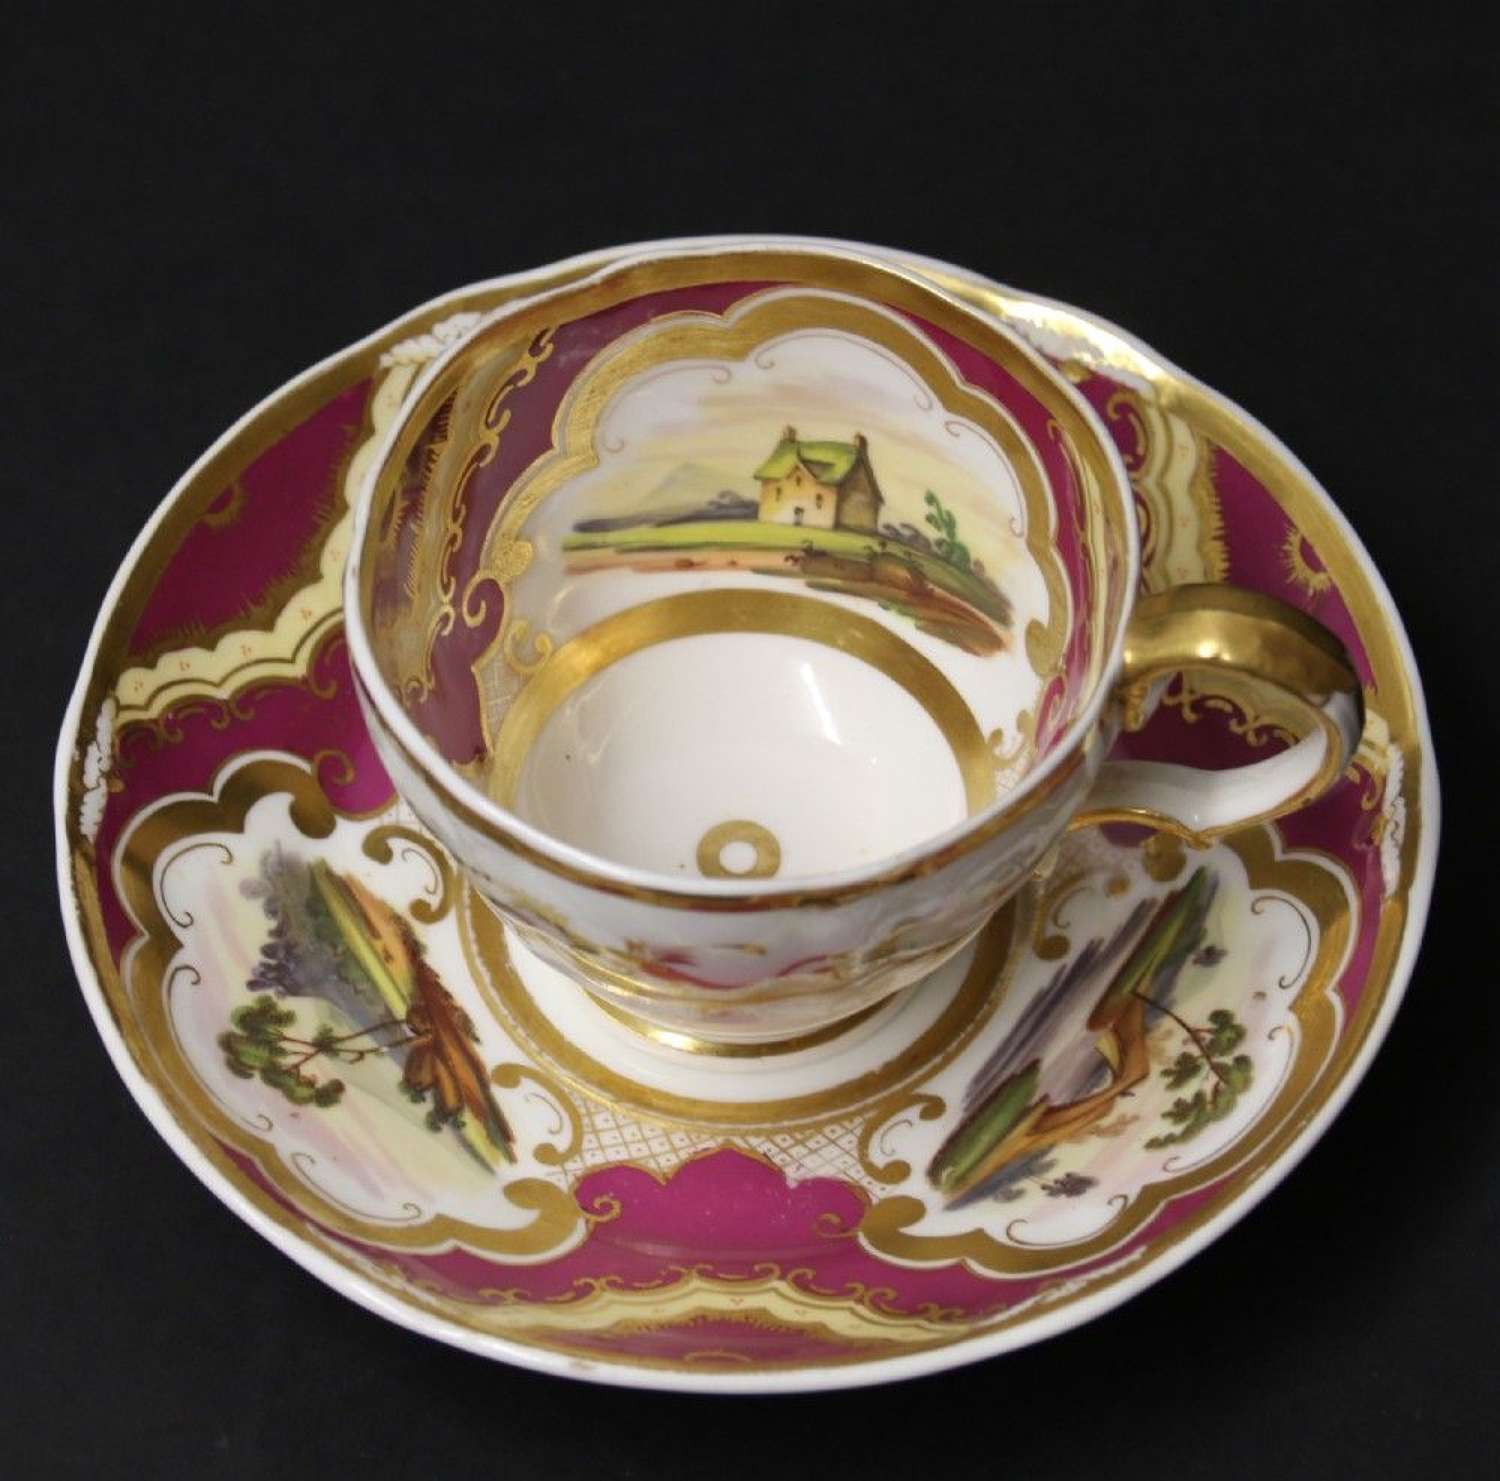 An Early 19th Century English Ridgeway Porcelain Cabinet Cup And Saucer